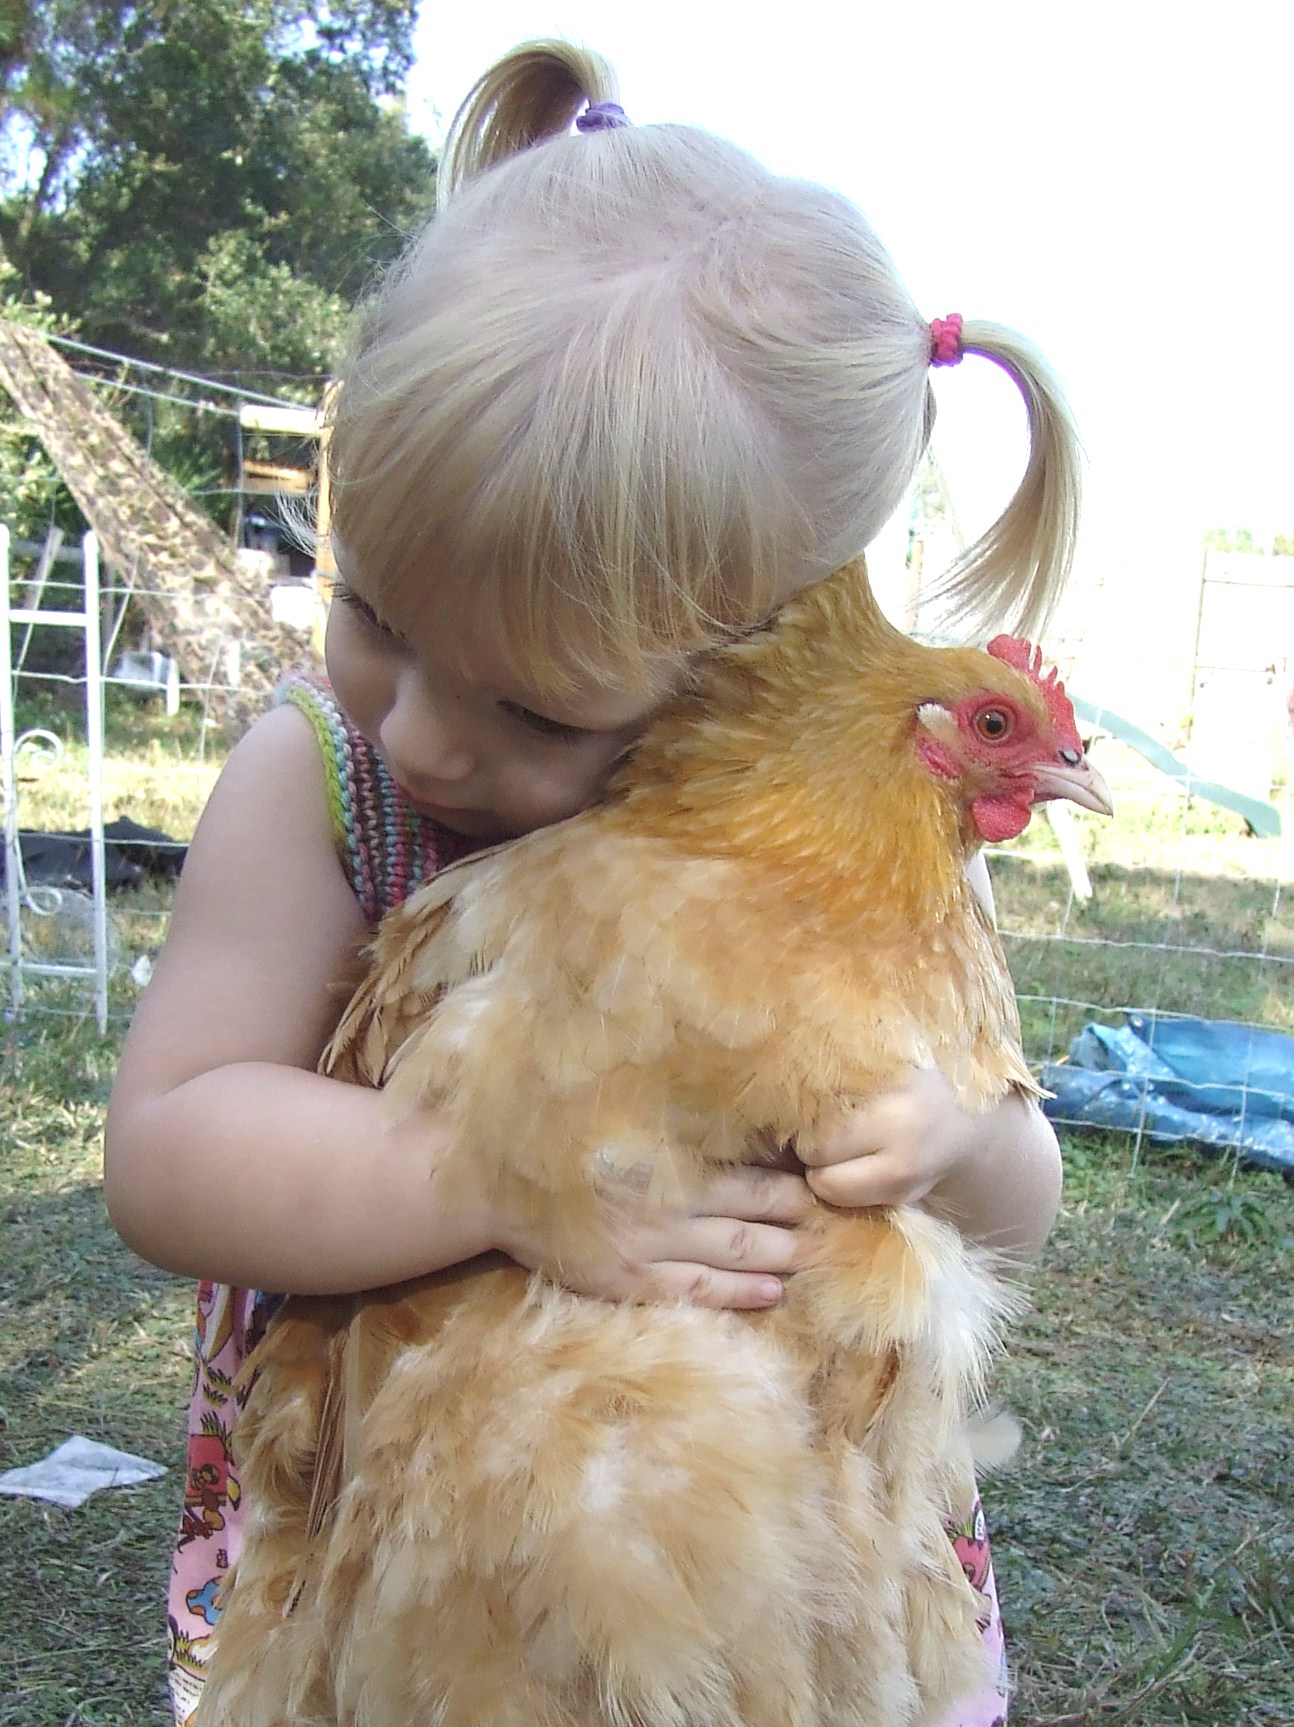 My grand baby with her favorite chicken "Baby".    Raised from a chick,  this prove what a docile kid friendly chicken the buff's are.  Love this breed.